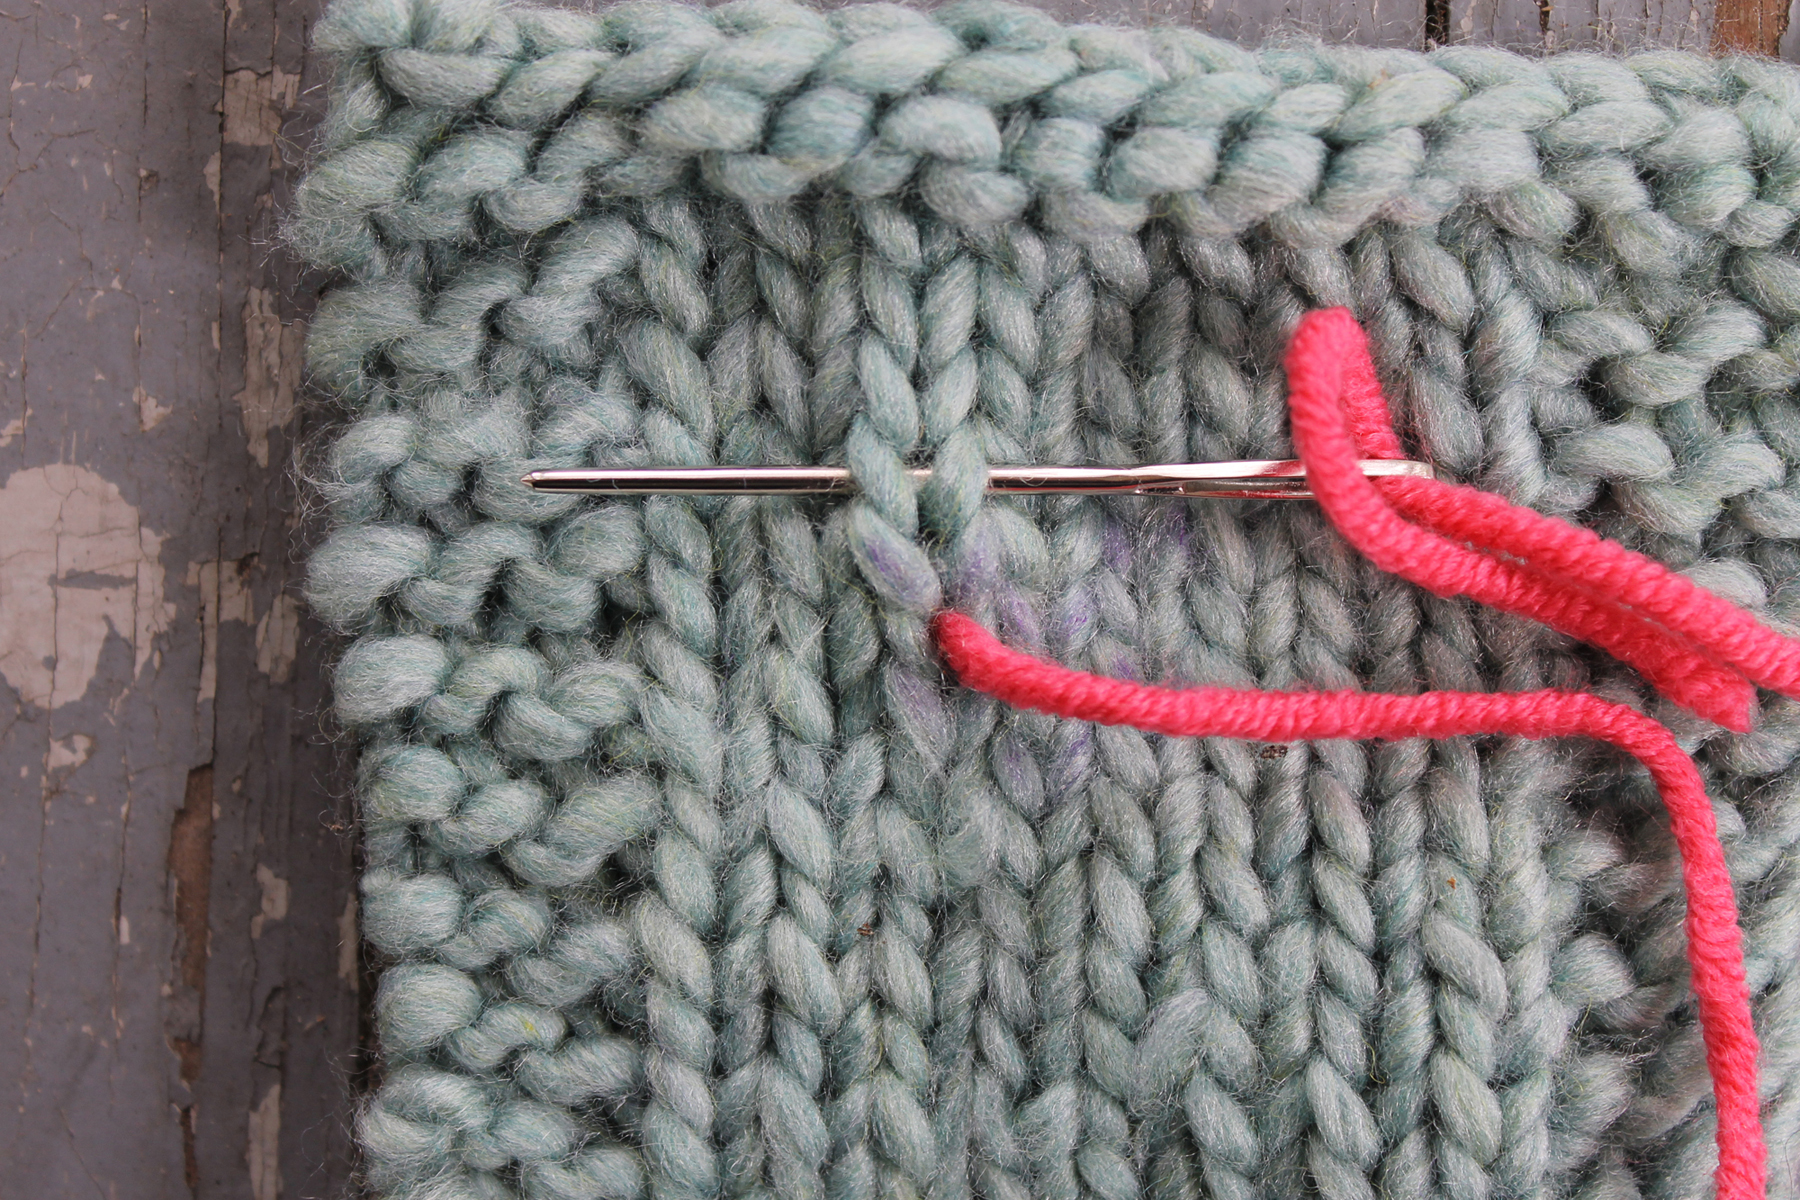 Inserting the needle above the duplicate stitch